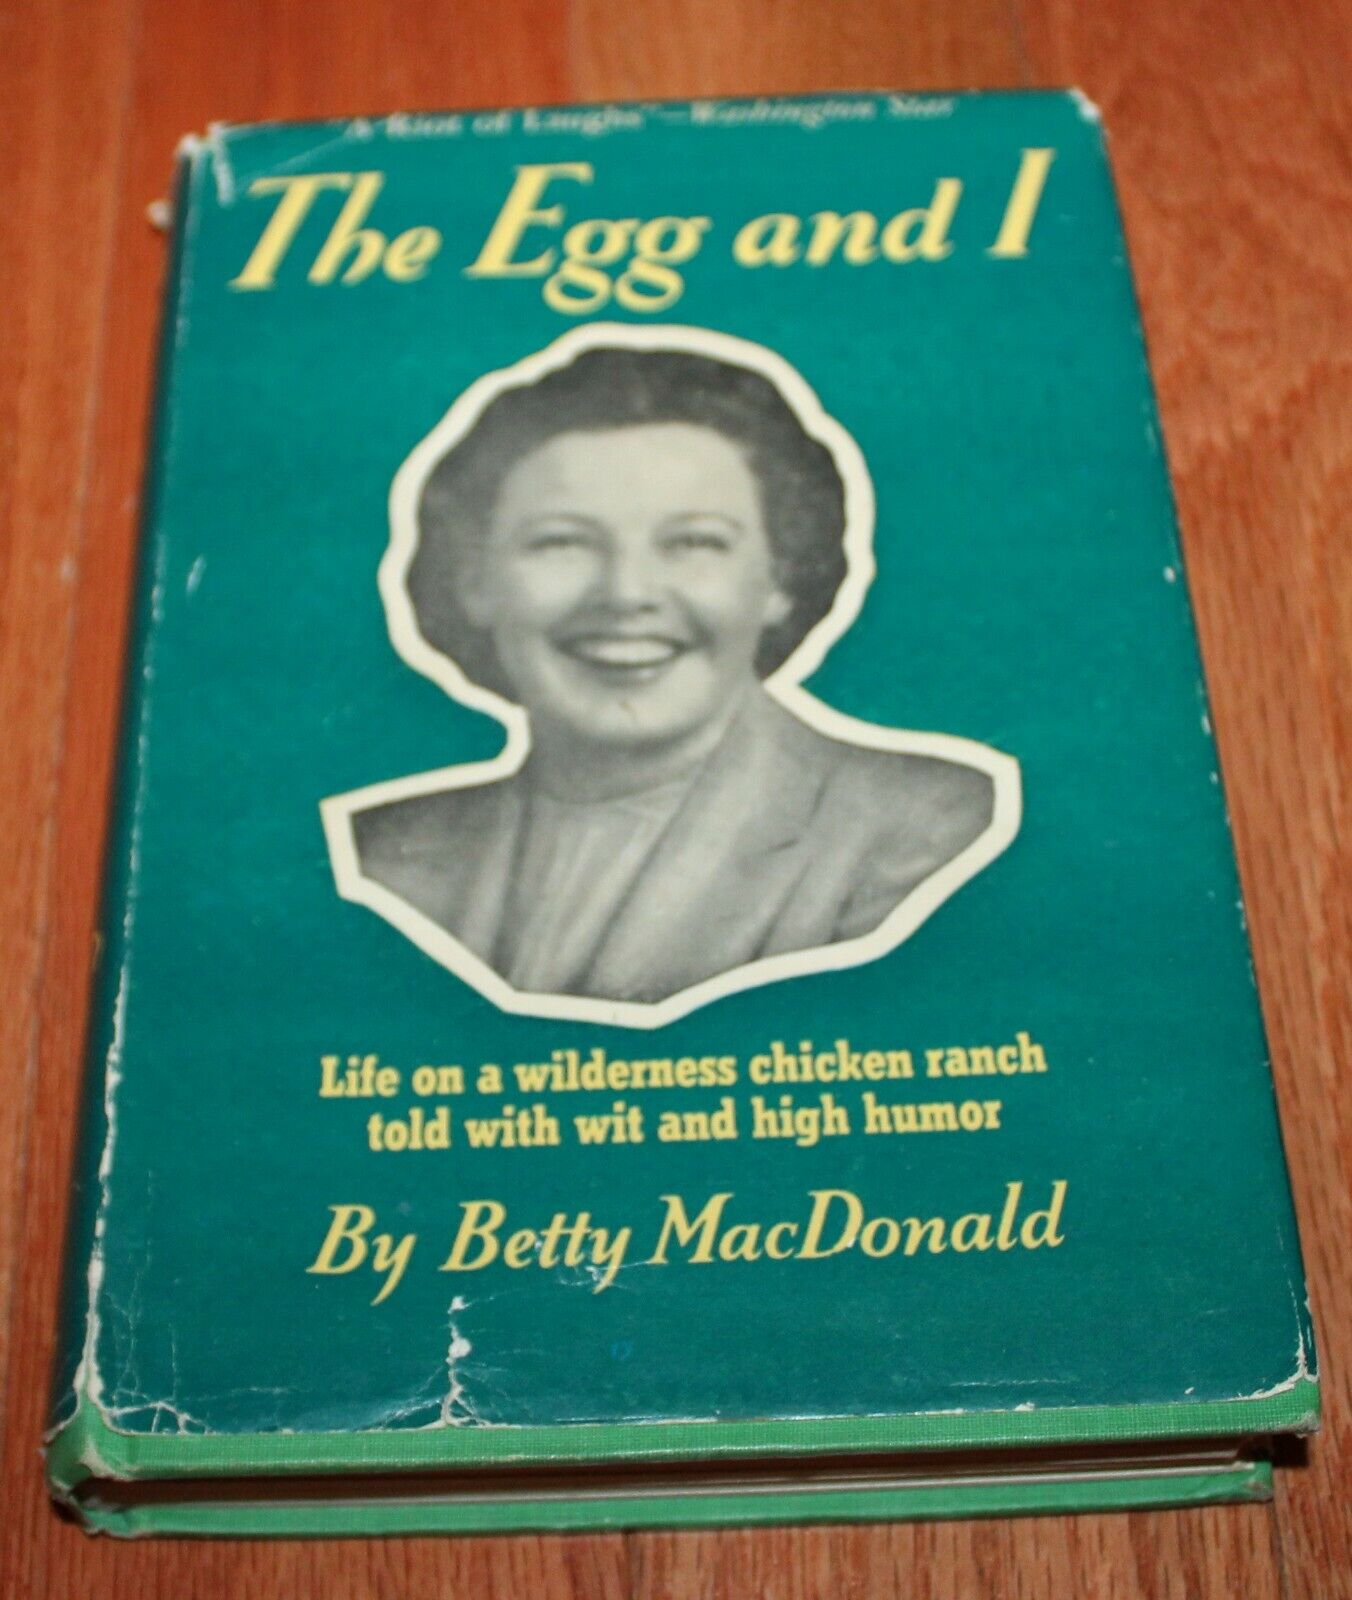 The Egg and I by Betty MacDonald  Very nice vintage hardcover with Jacket